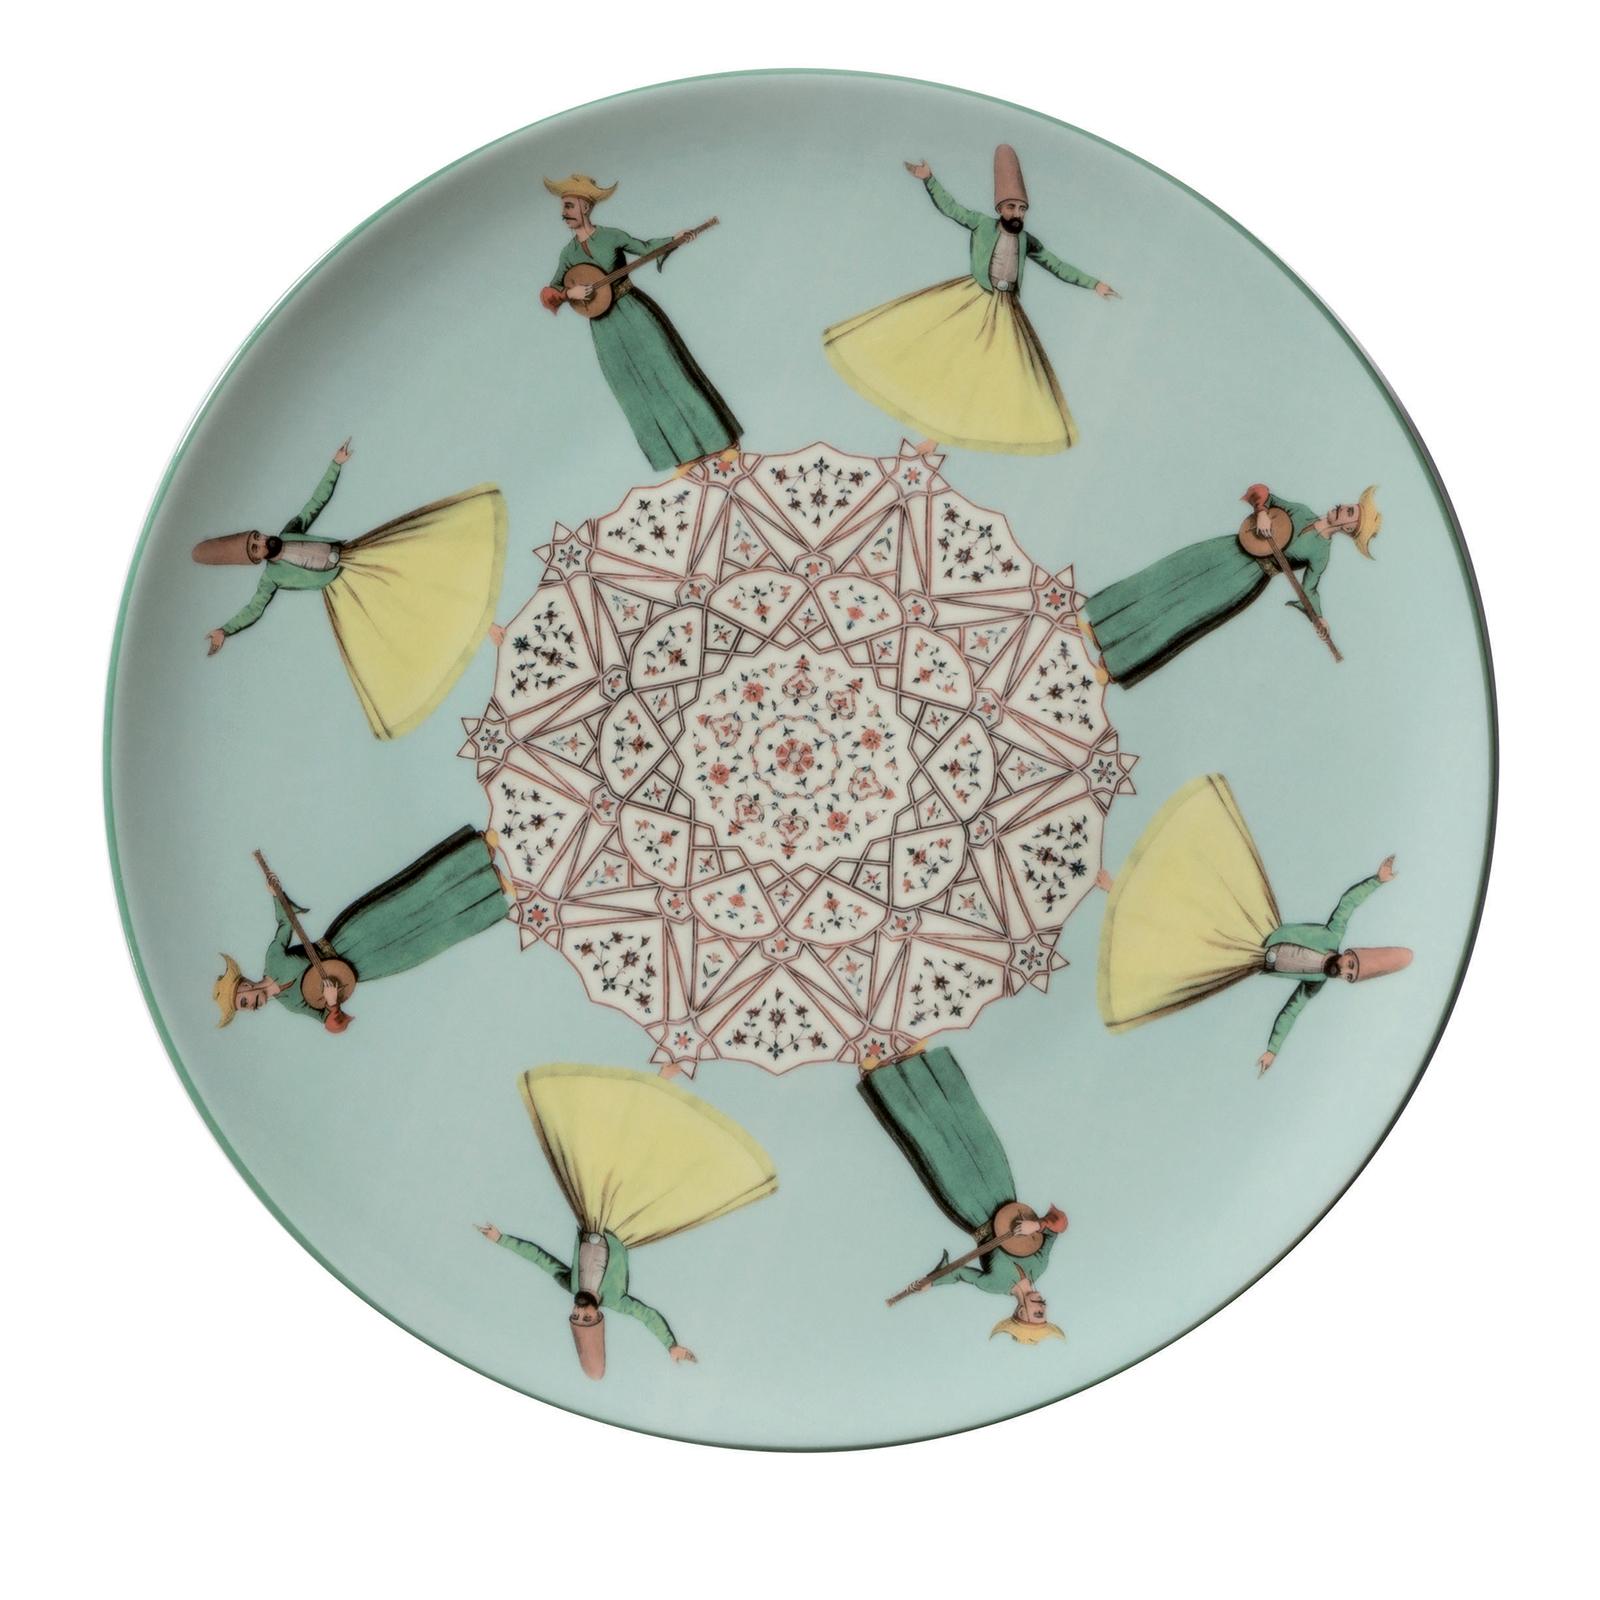 This set features the 12 different designs of the complete Costantinopoli collection, creating a bouquet of dessert plates, each with its distinctive colors and decorations. The result is a colorful and dynamic accent that will equally enliven a